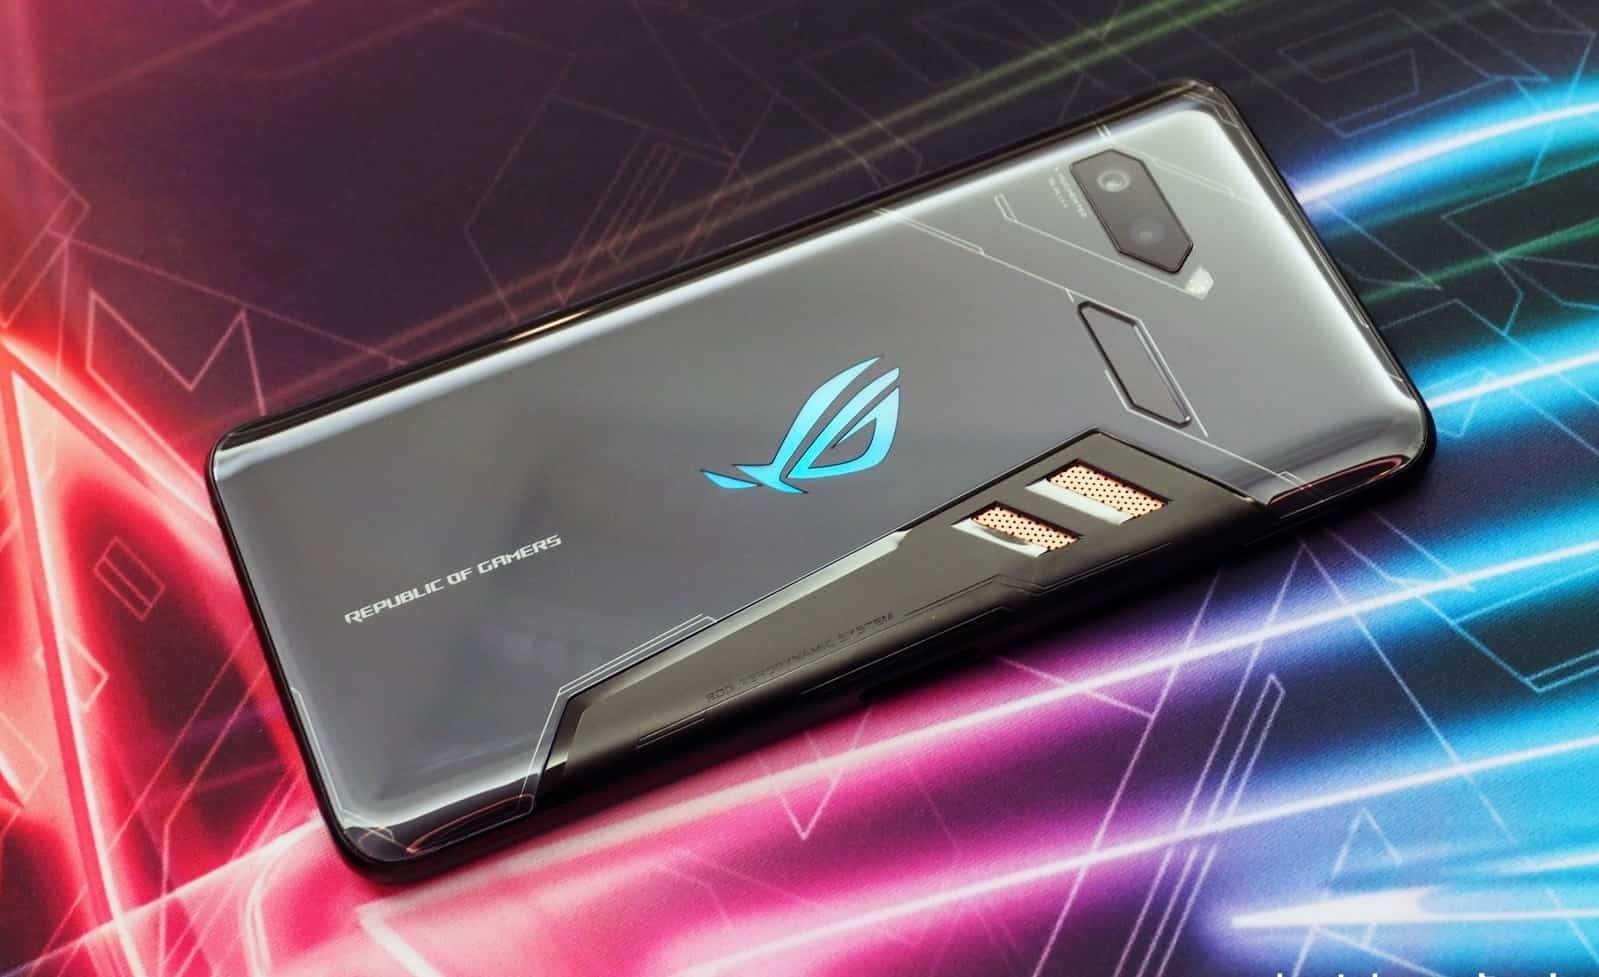 ASUS ROG handson The new gaming phone with AMAZING 8GB RAM!